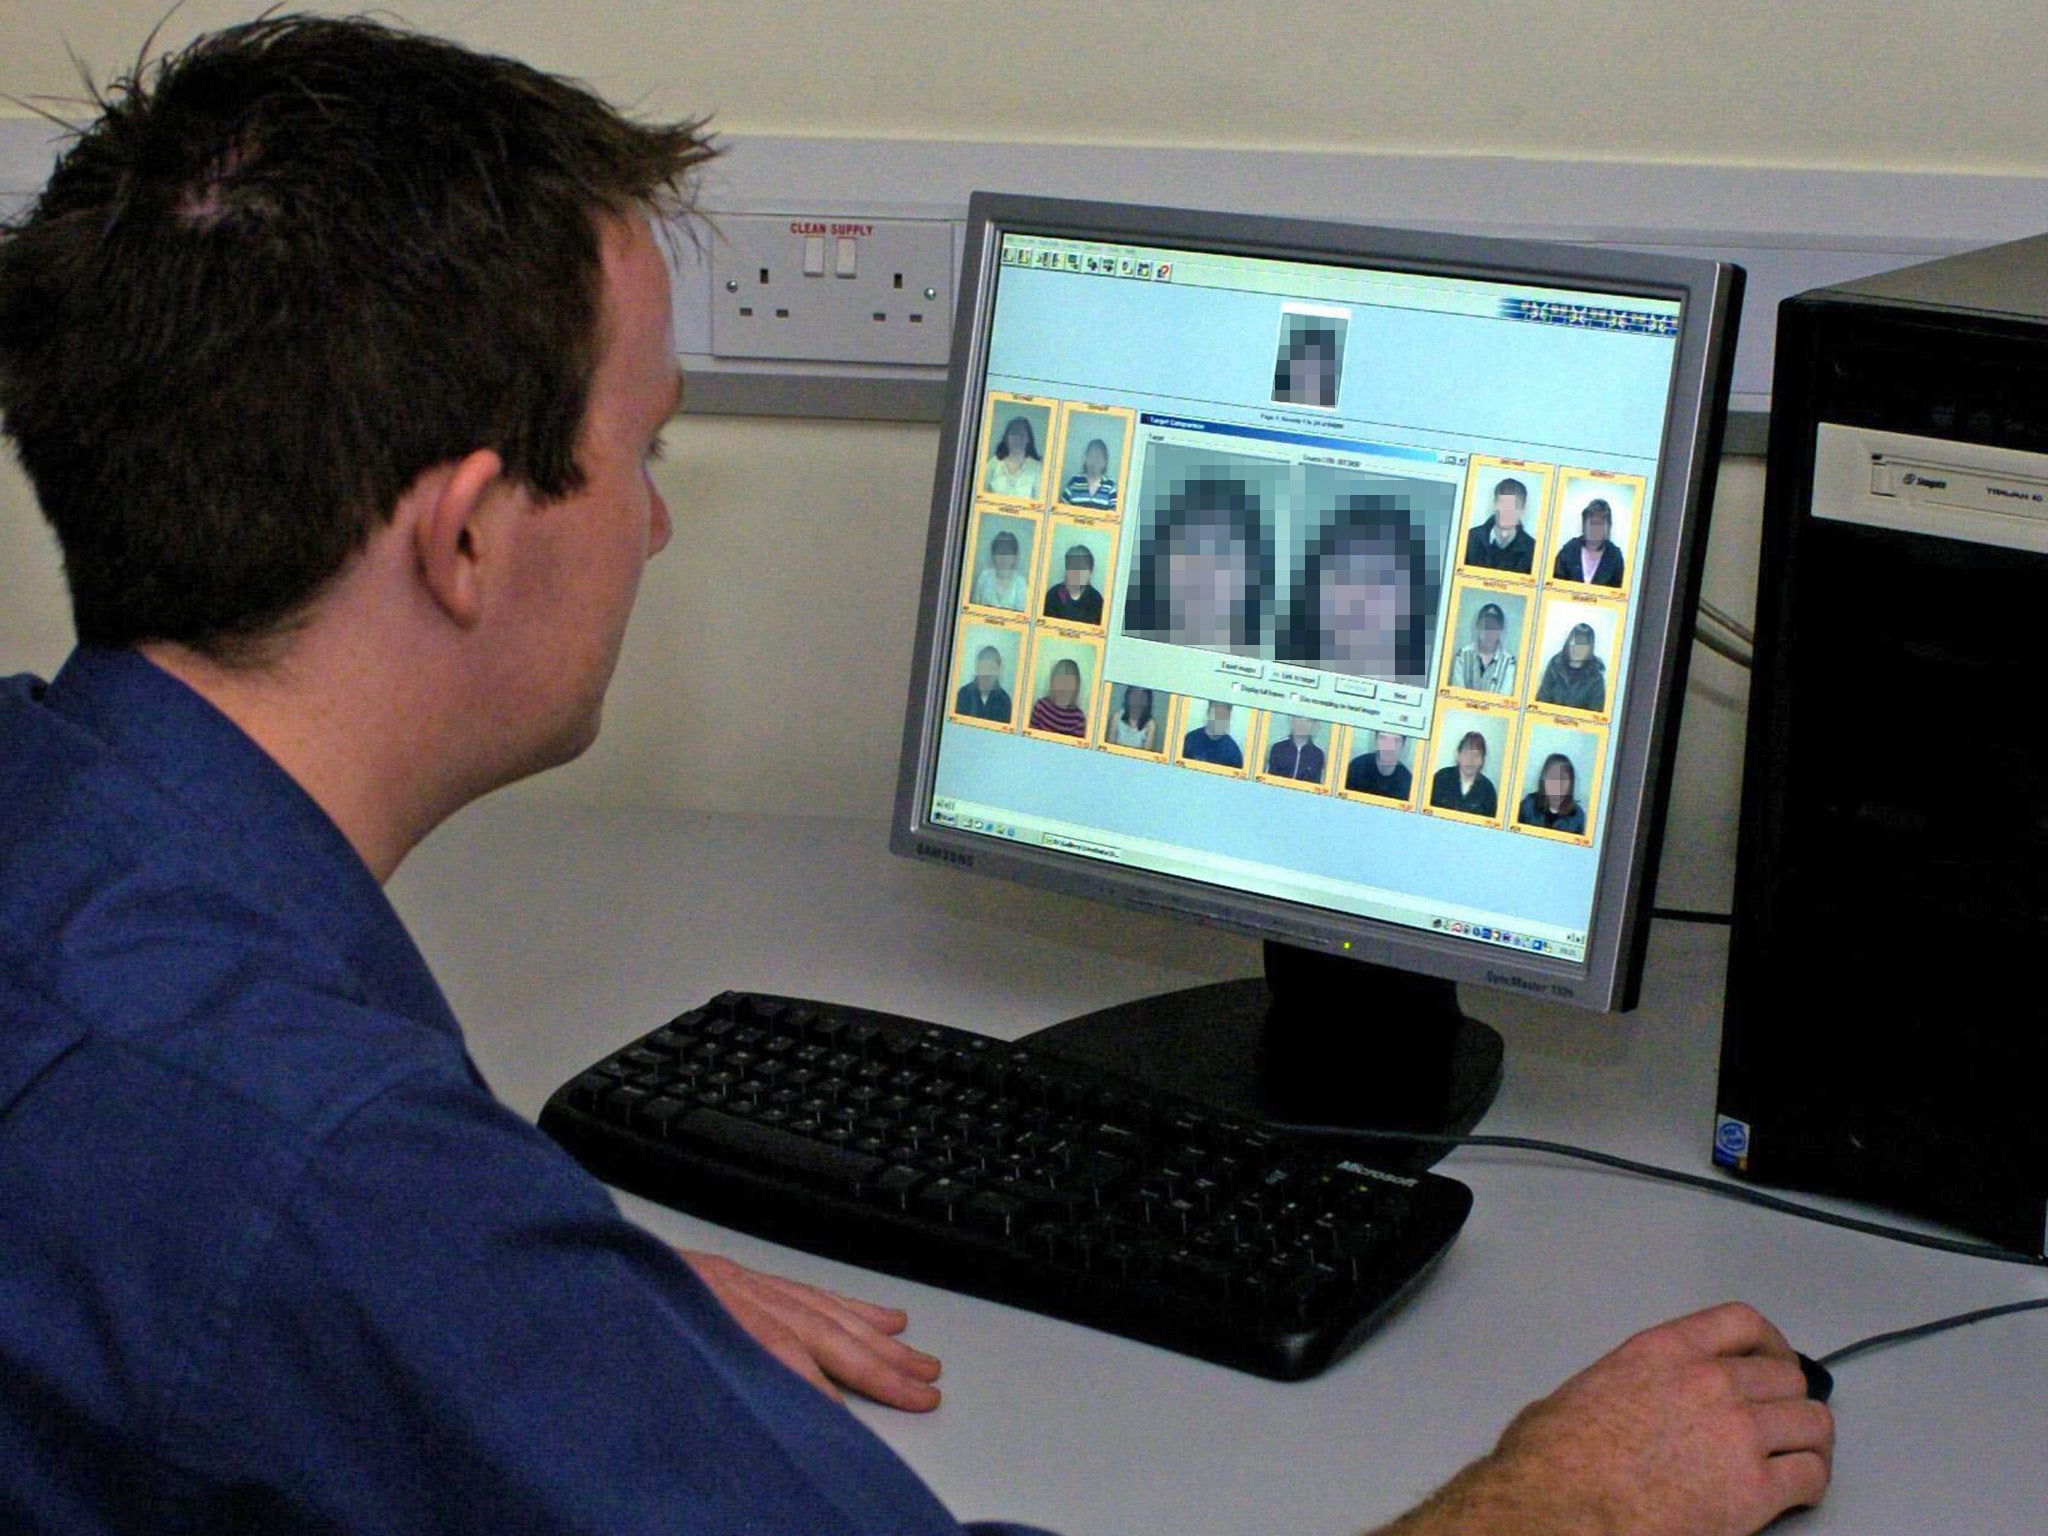 &apos;Too expensive&apos; to delete millions of police mugshots of innocent people, minister claims